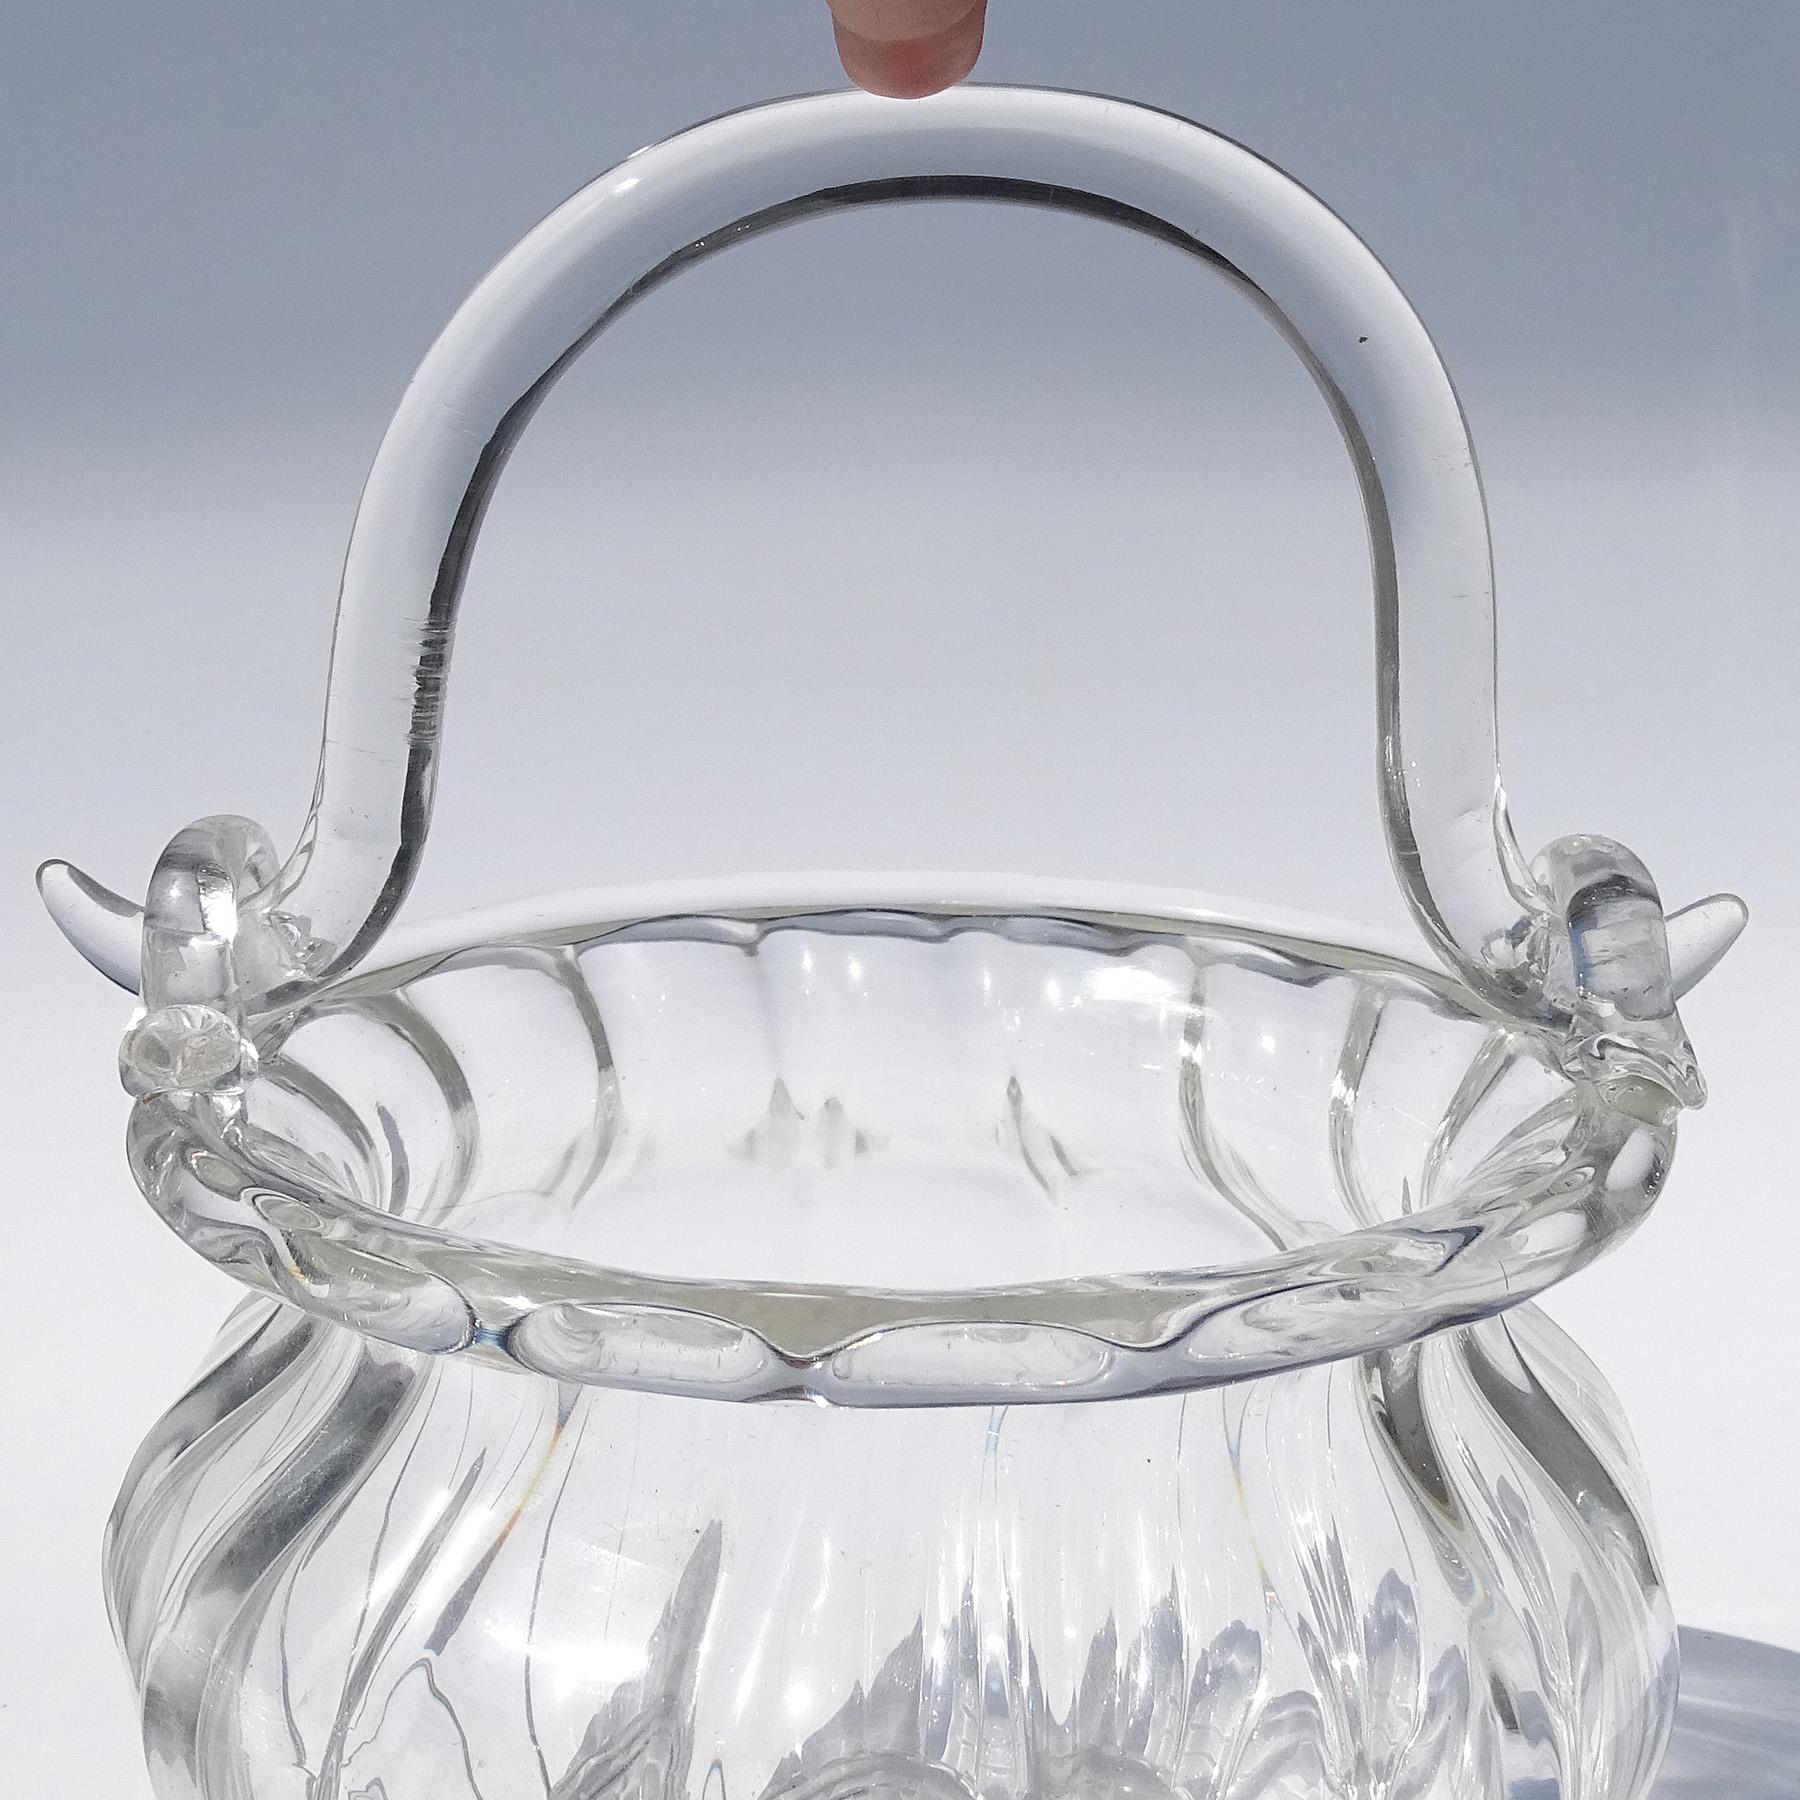 Beautiful vintage Murano hand blown crystal clear Italian art glass ribbed working handle flower basket / vase. Documented to designer Archimede Seguso. The basket has an original 